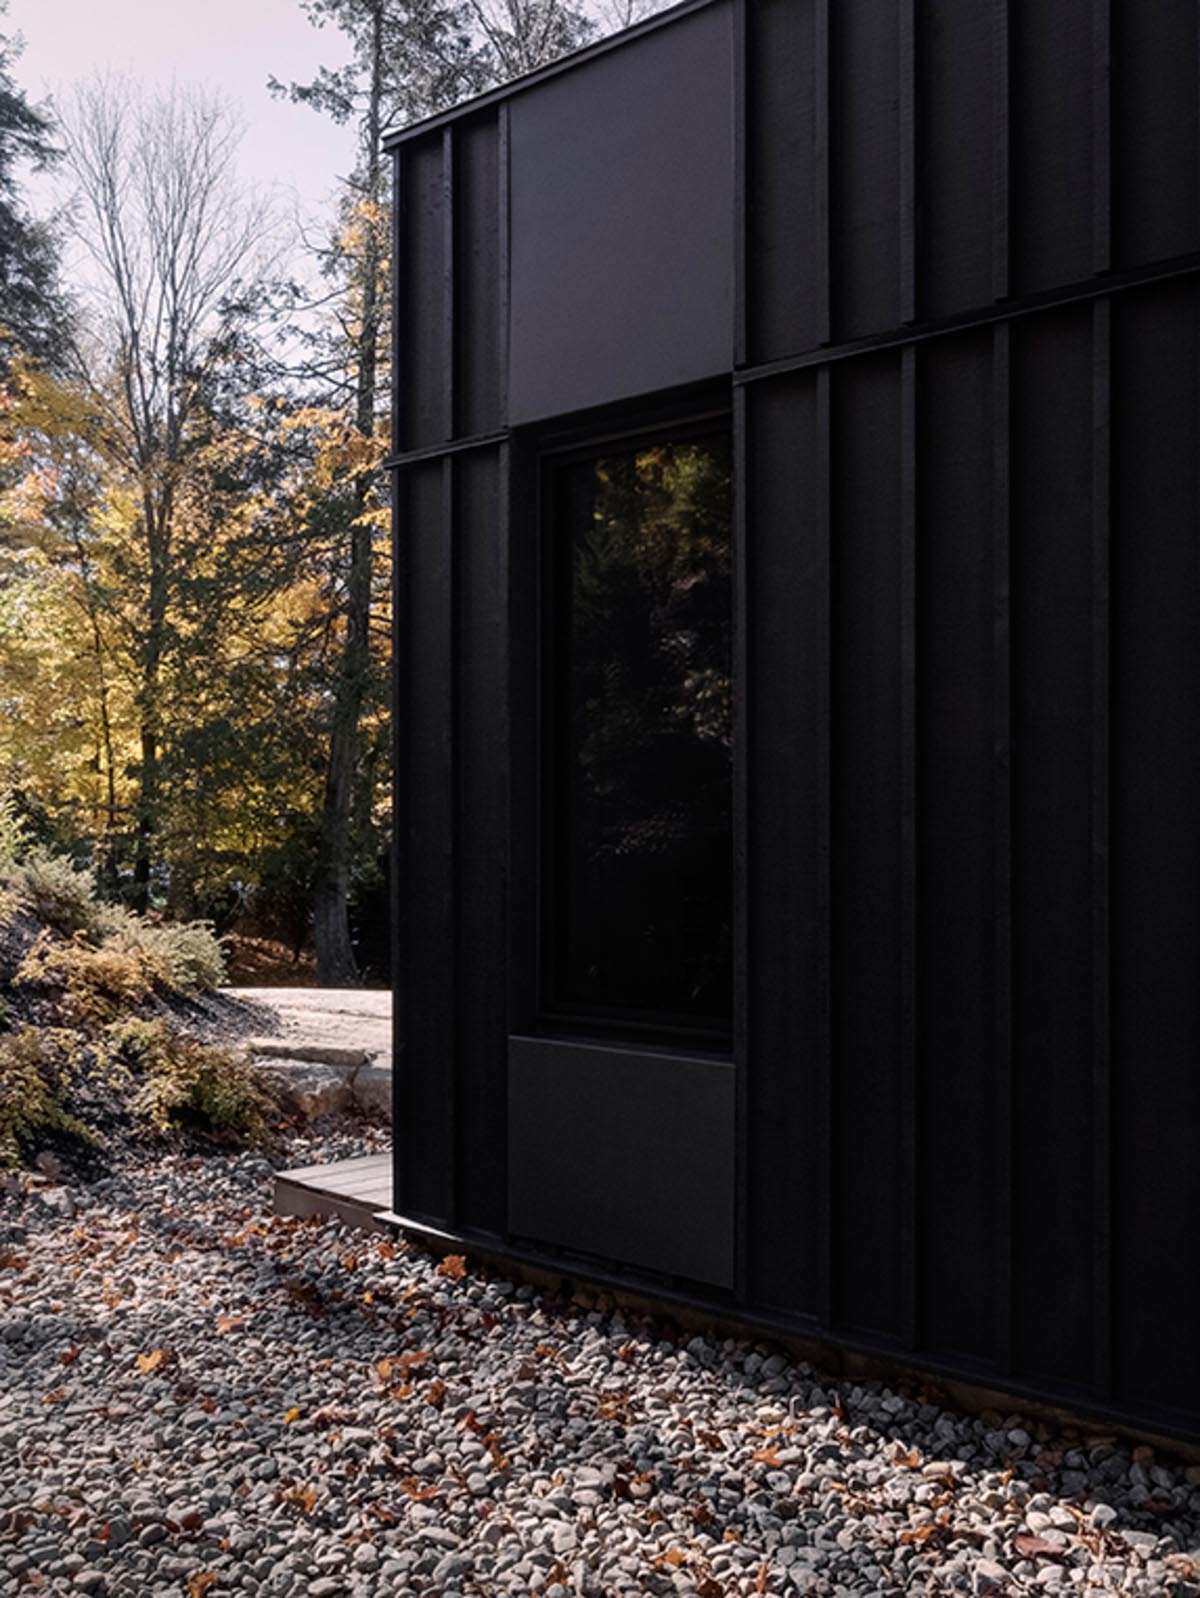 A modern house with black siding and black window frames.